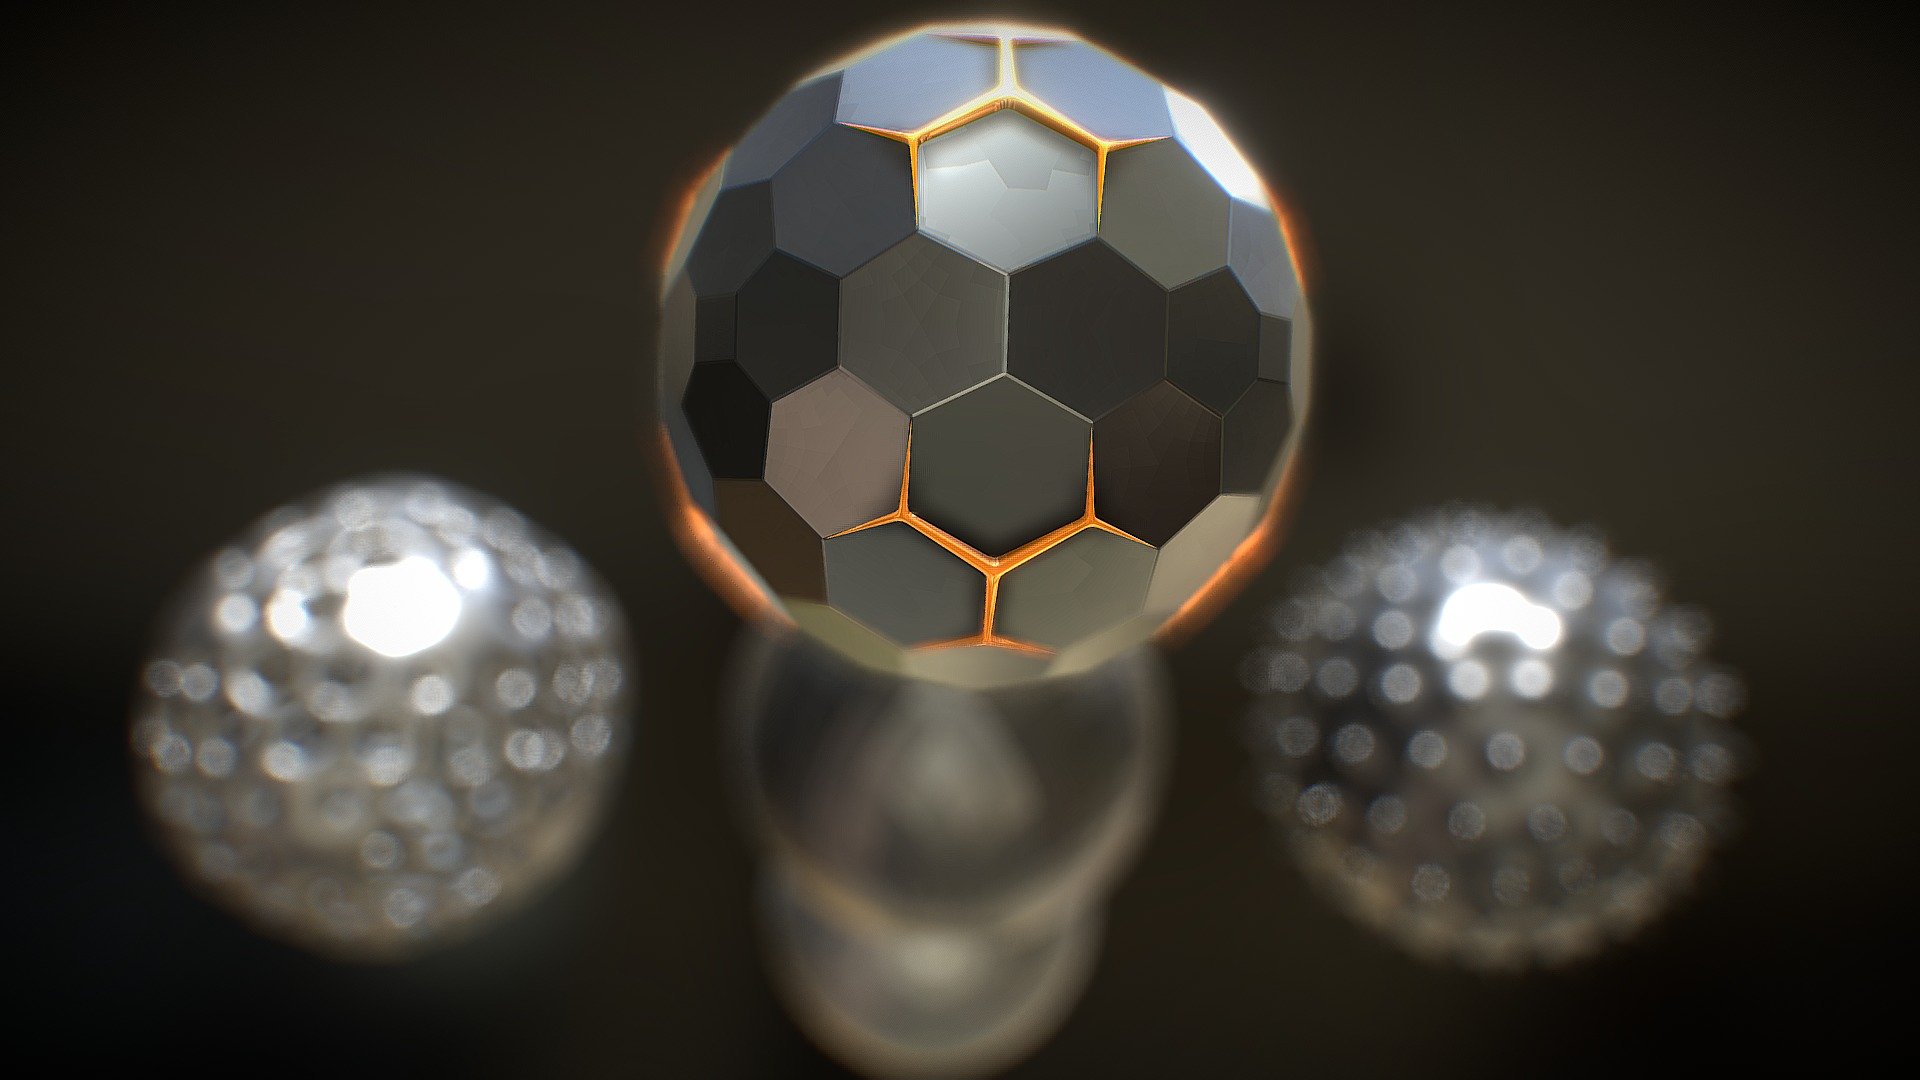 Five Abstract Spherical Objects - 3D Models by BlockedGravity

Formats included:

 * .obj, * .mtl, * .c4d, * .fbx, * .3ds  - Abstract Spherical Objects - Five 3D Models - Buy Royalty Free 3D model by BlockedGravity 3d model